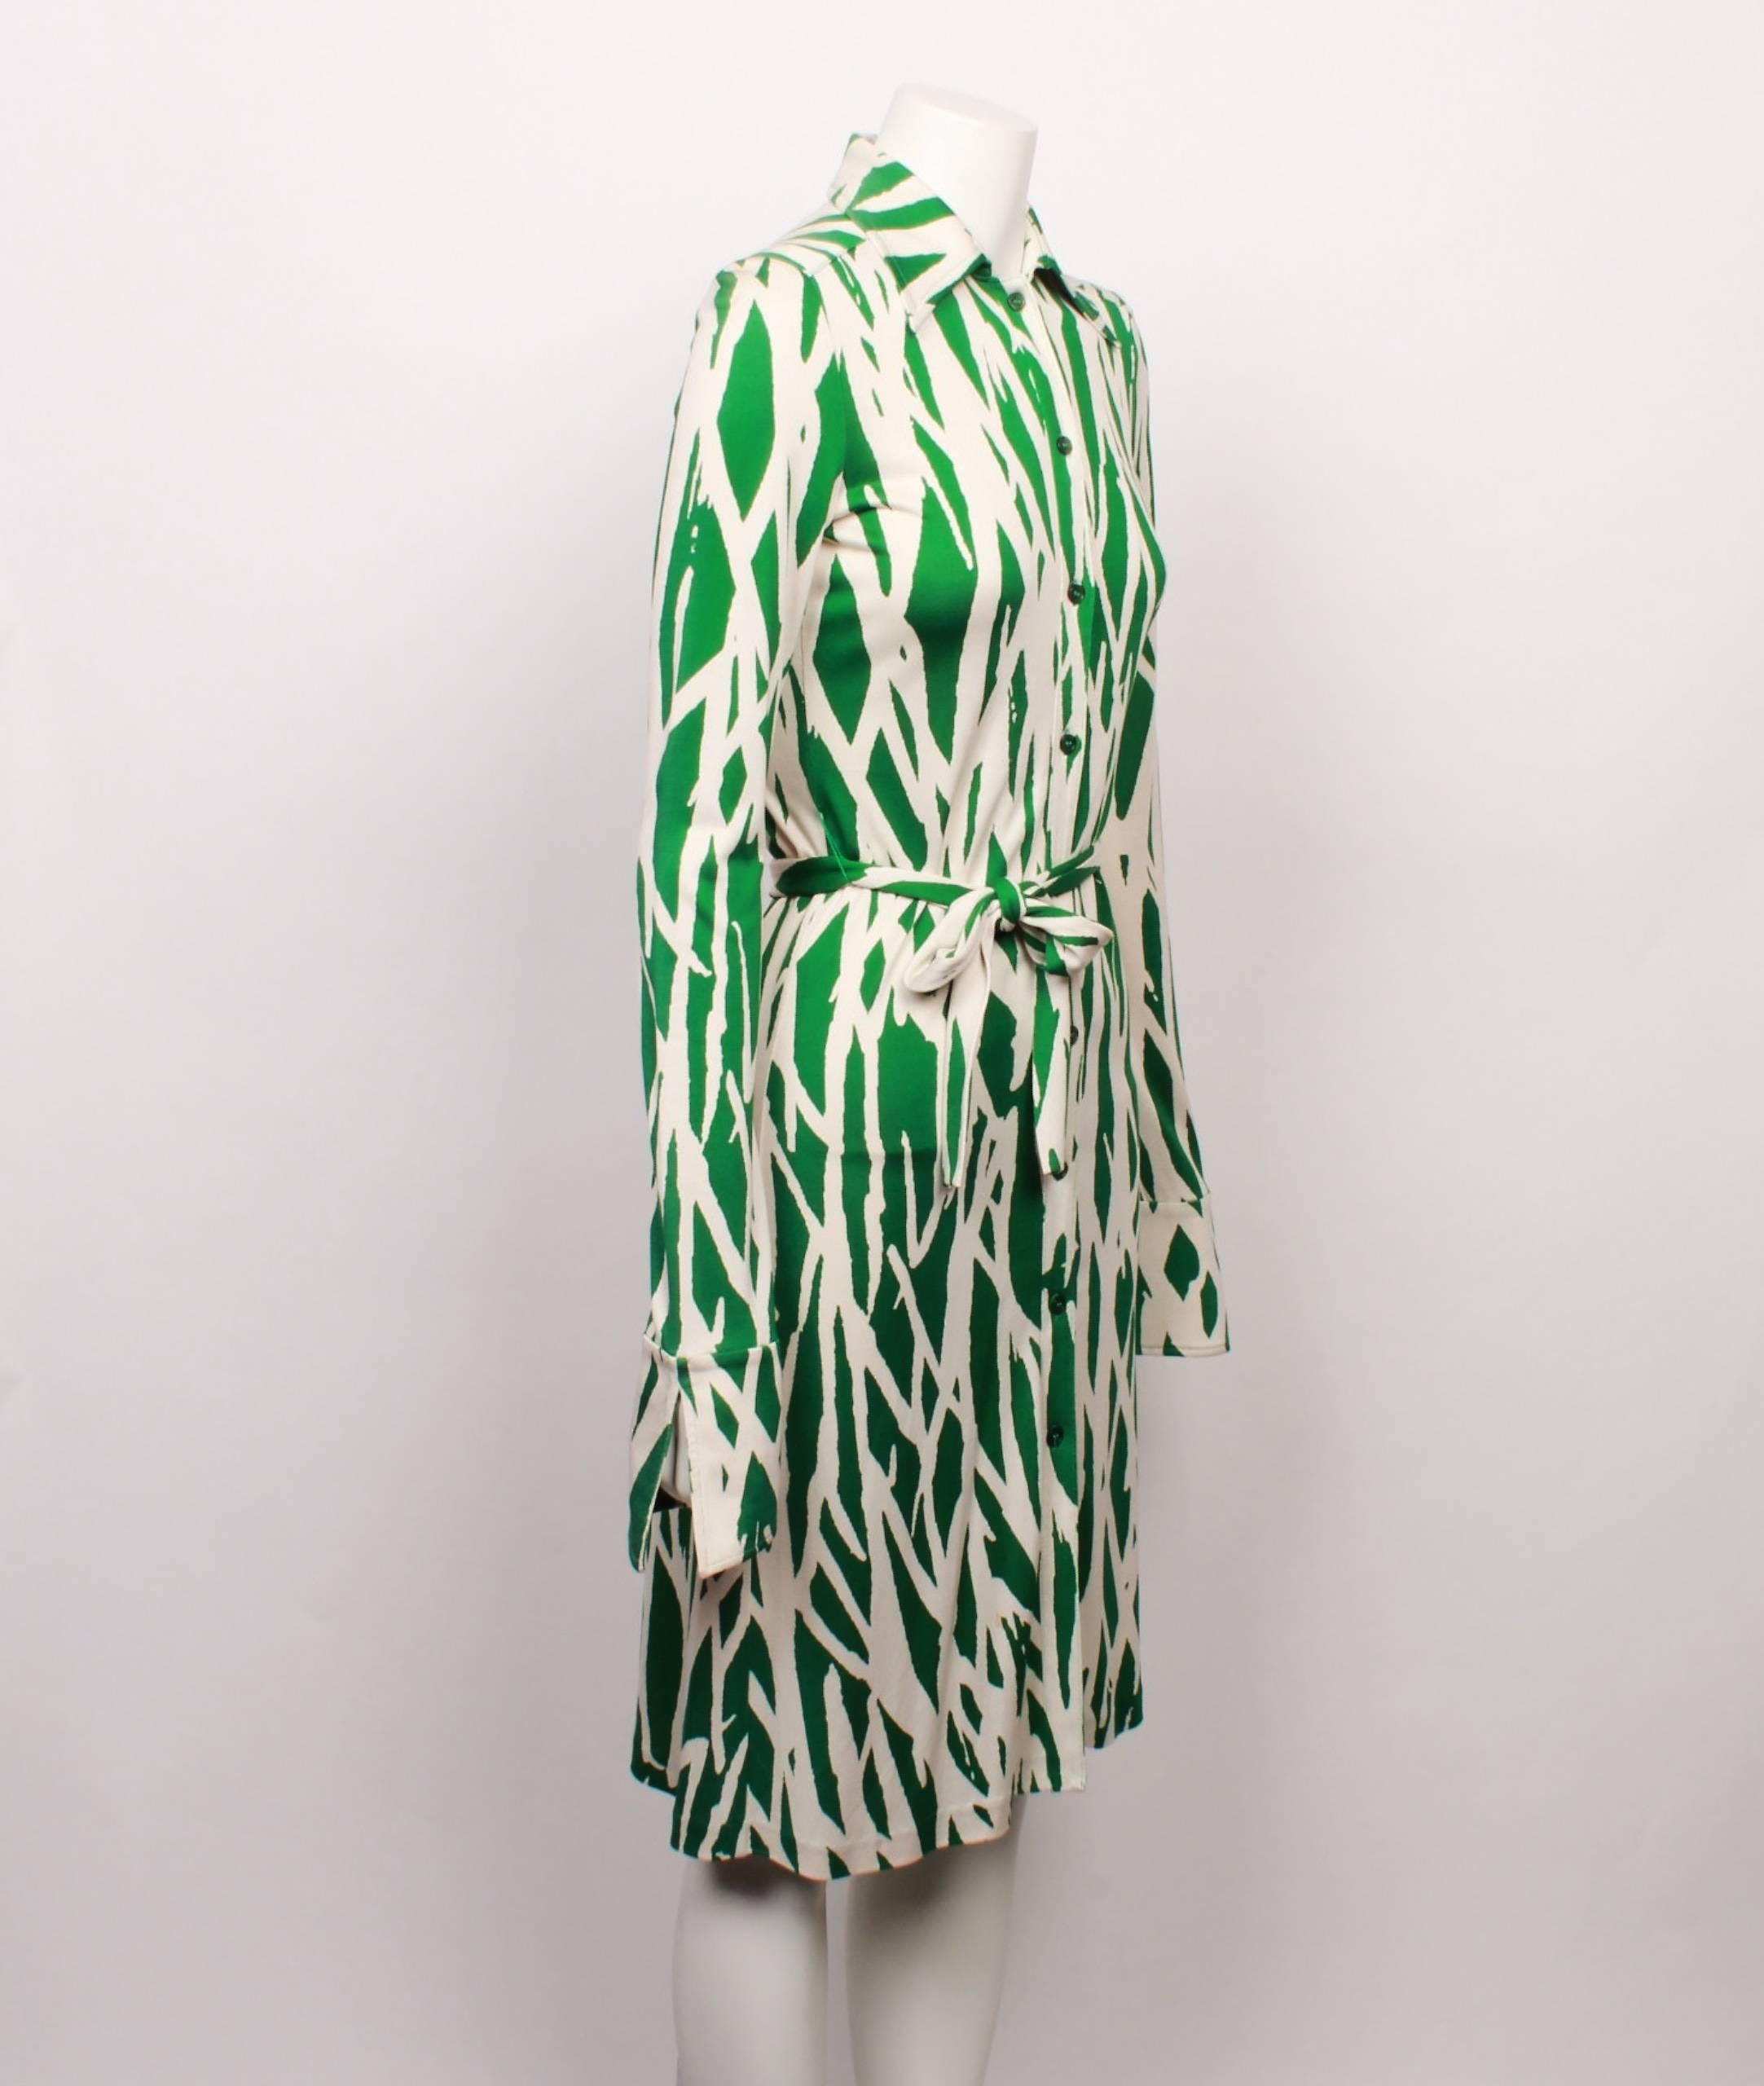 Diane Von Furstenburg iconic style knee length shirt dress in 100% silk jersey. 

The Diane Vintage Collection was released in 2011 and features DVF cult dress styles and prints. This was one of the headline pieces from the first collection and a re